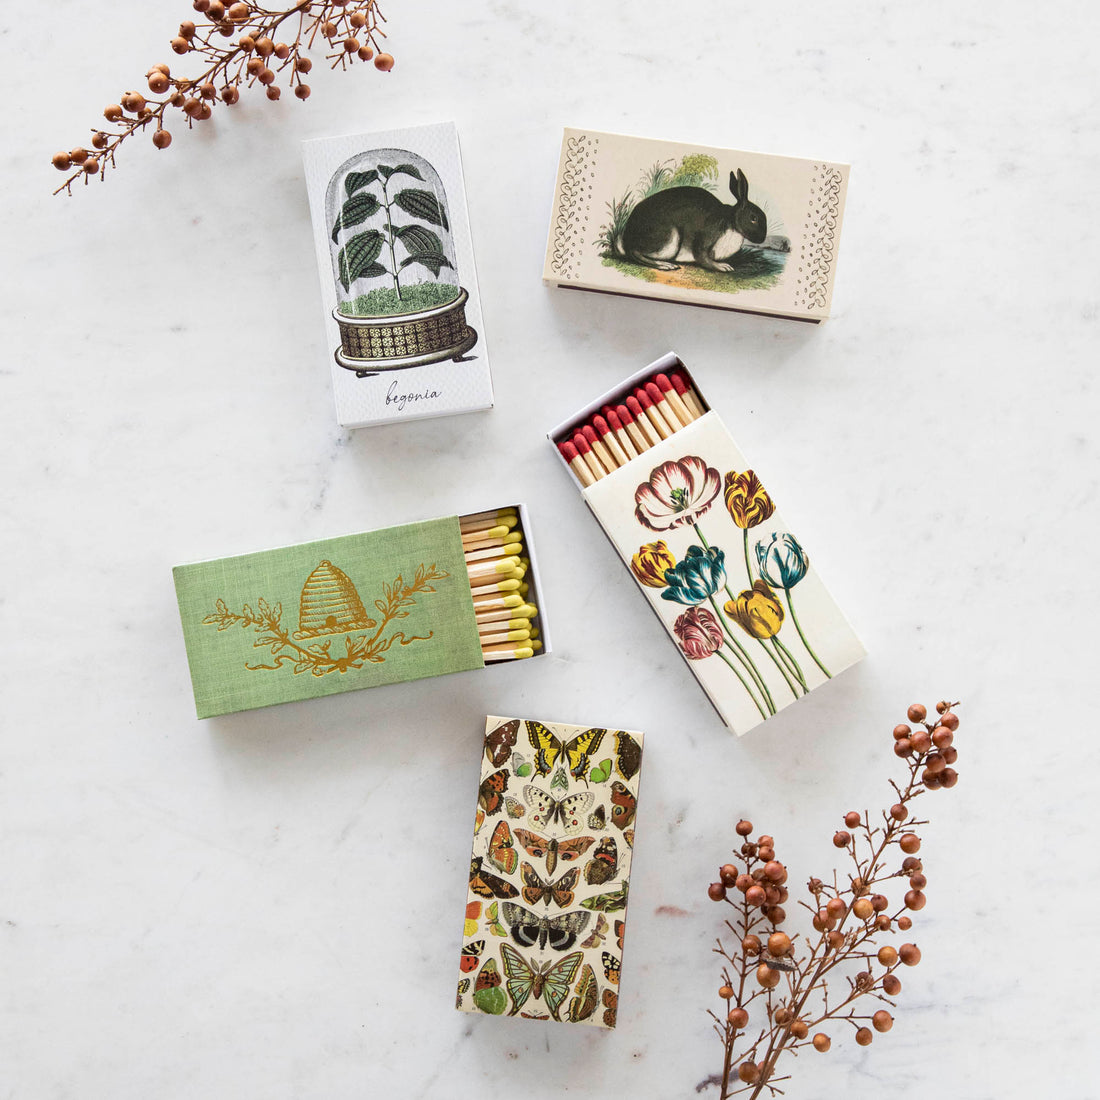 Four boxes of Nature Matches by HomArt with decorative floral and botanical designs laid out on a marble surface, accompanied by sprigs of dried plants.